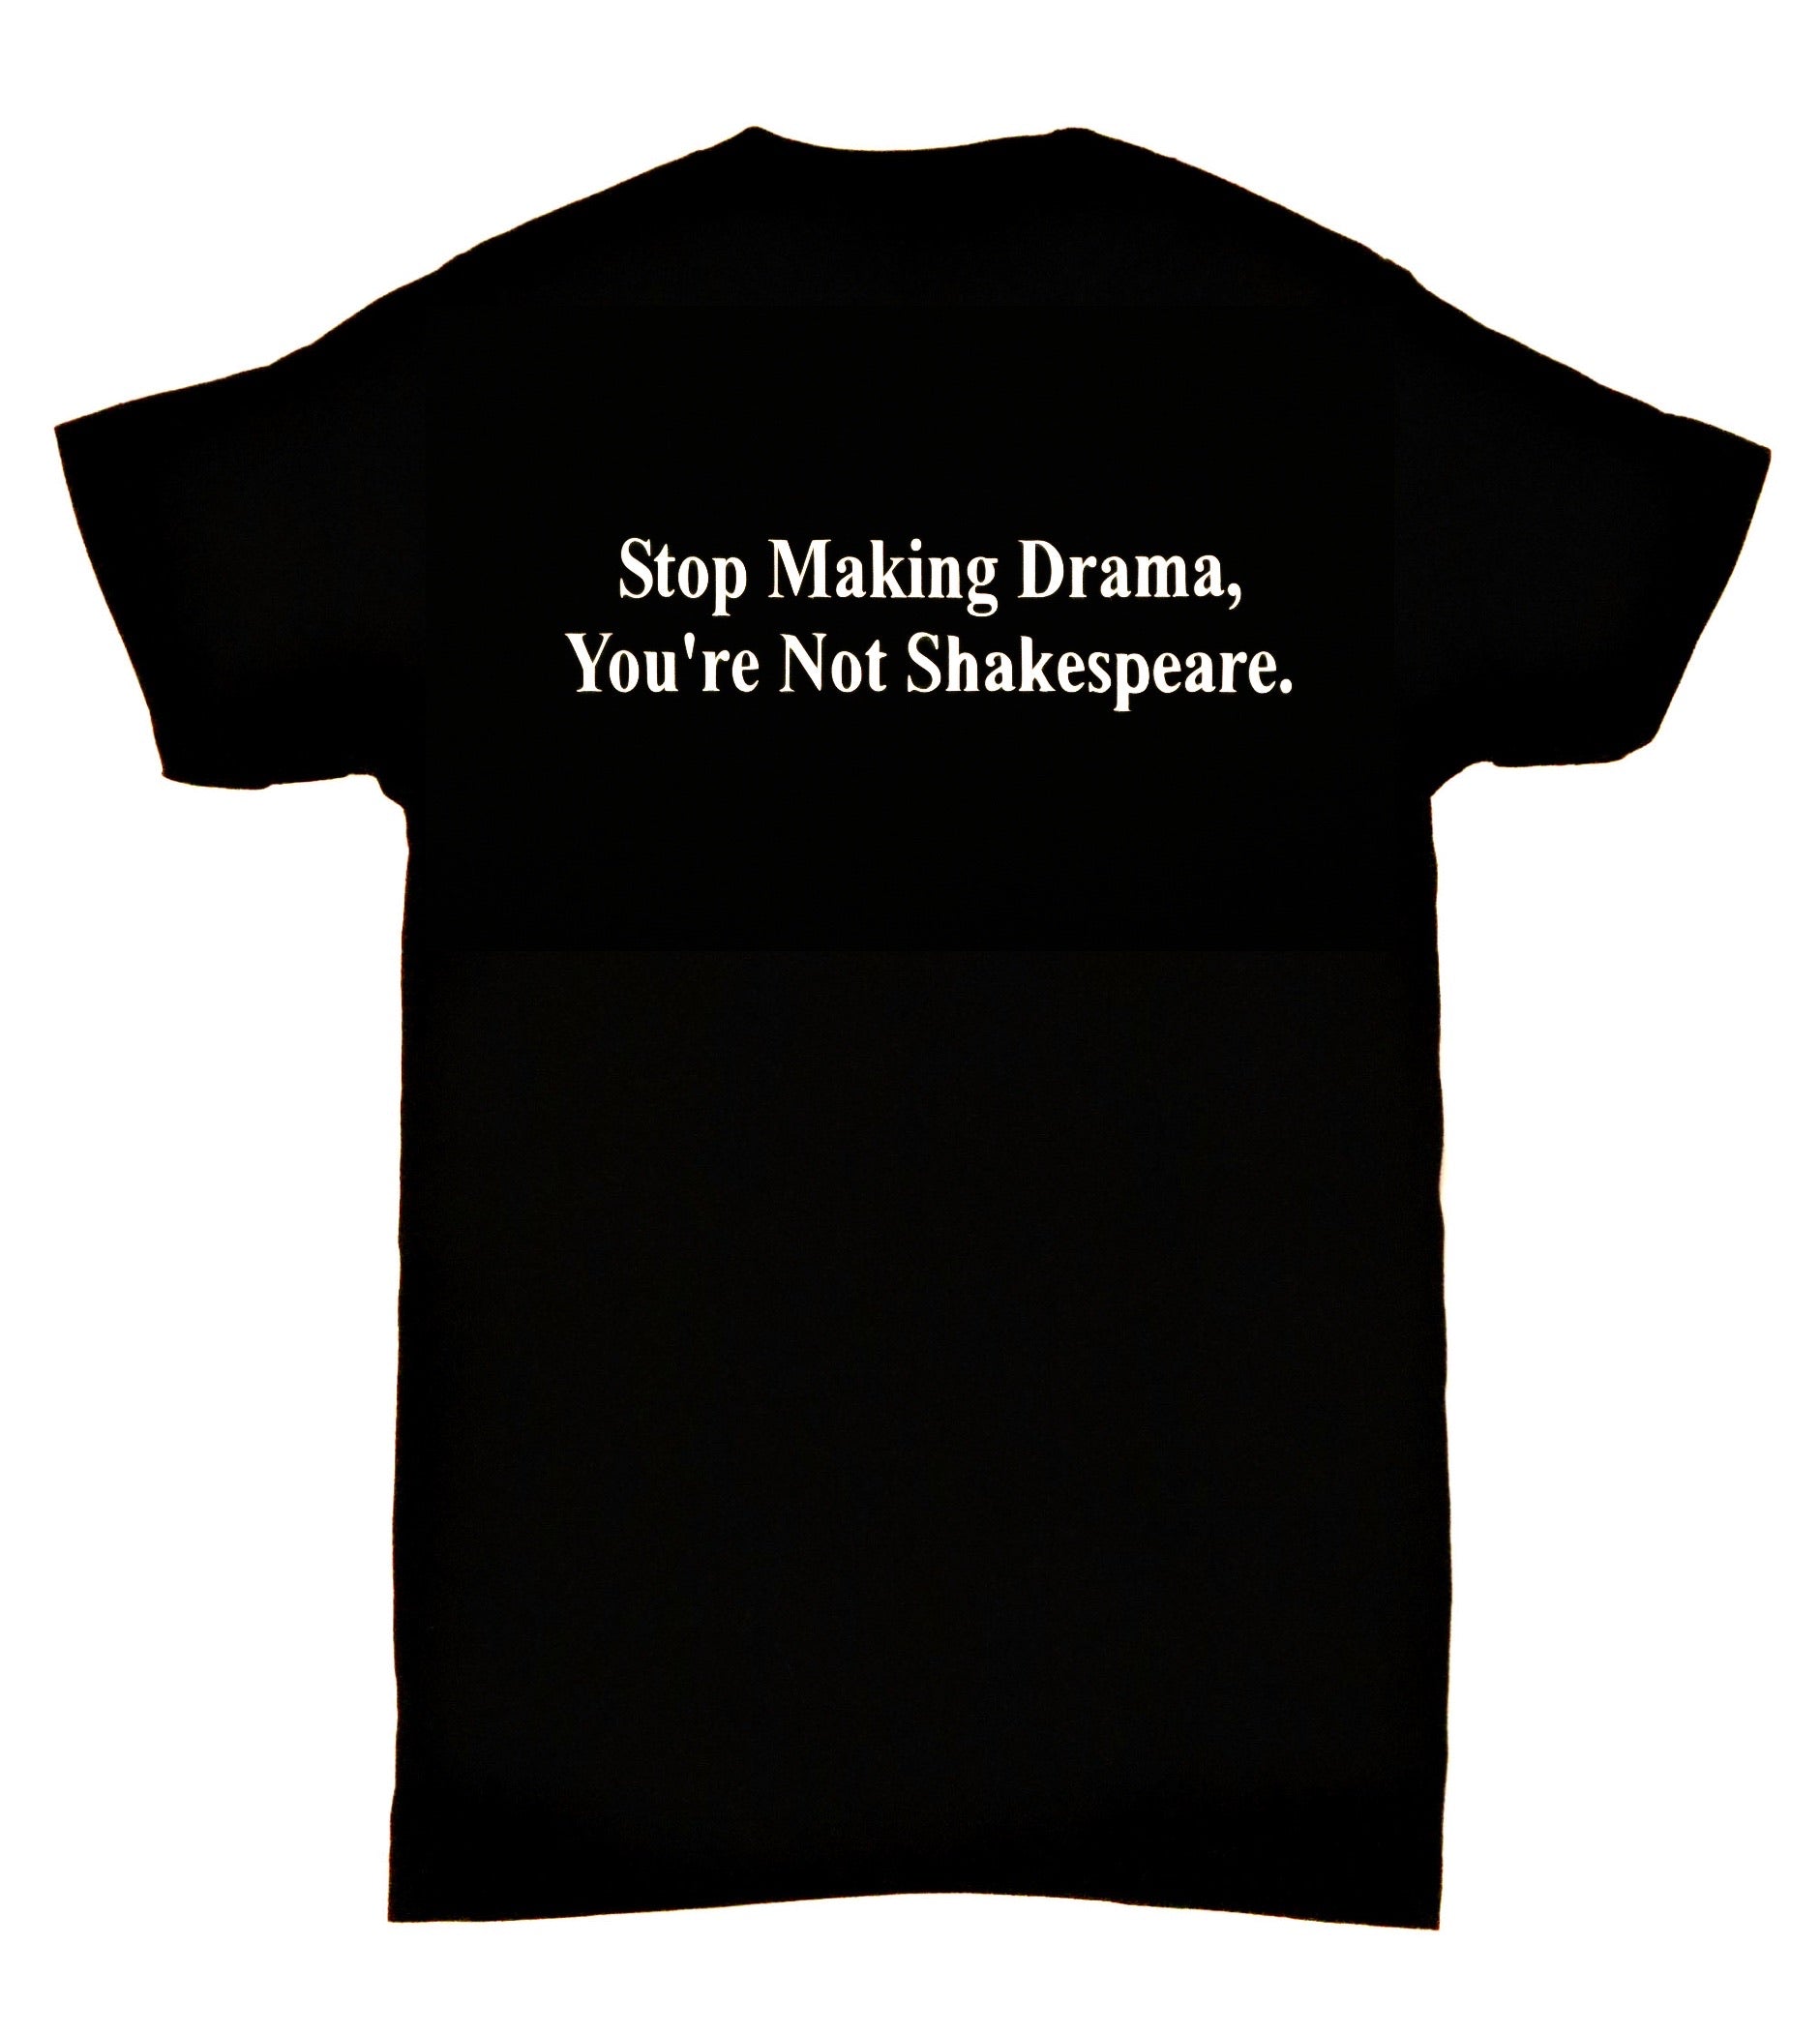 Stop Making Drama, You’re Not Shakespeare. Stop Making Drama, You’re Not Shakespeare.